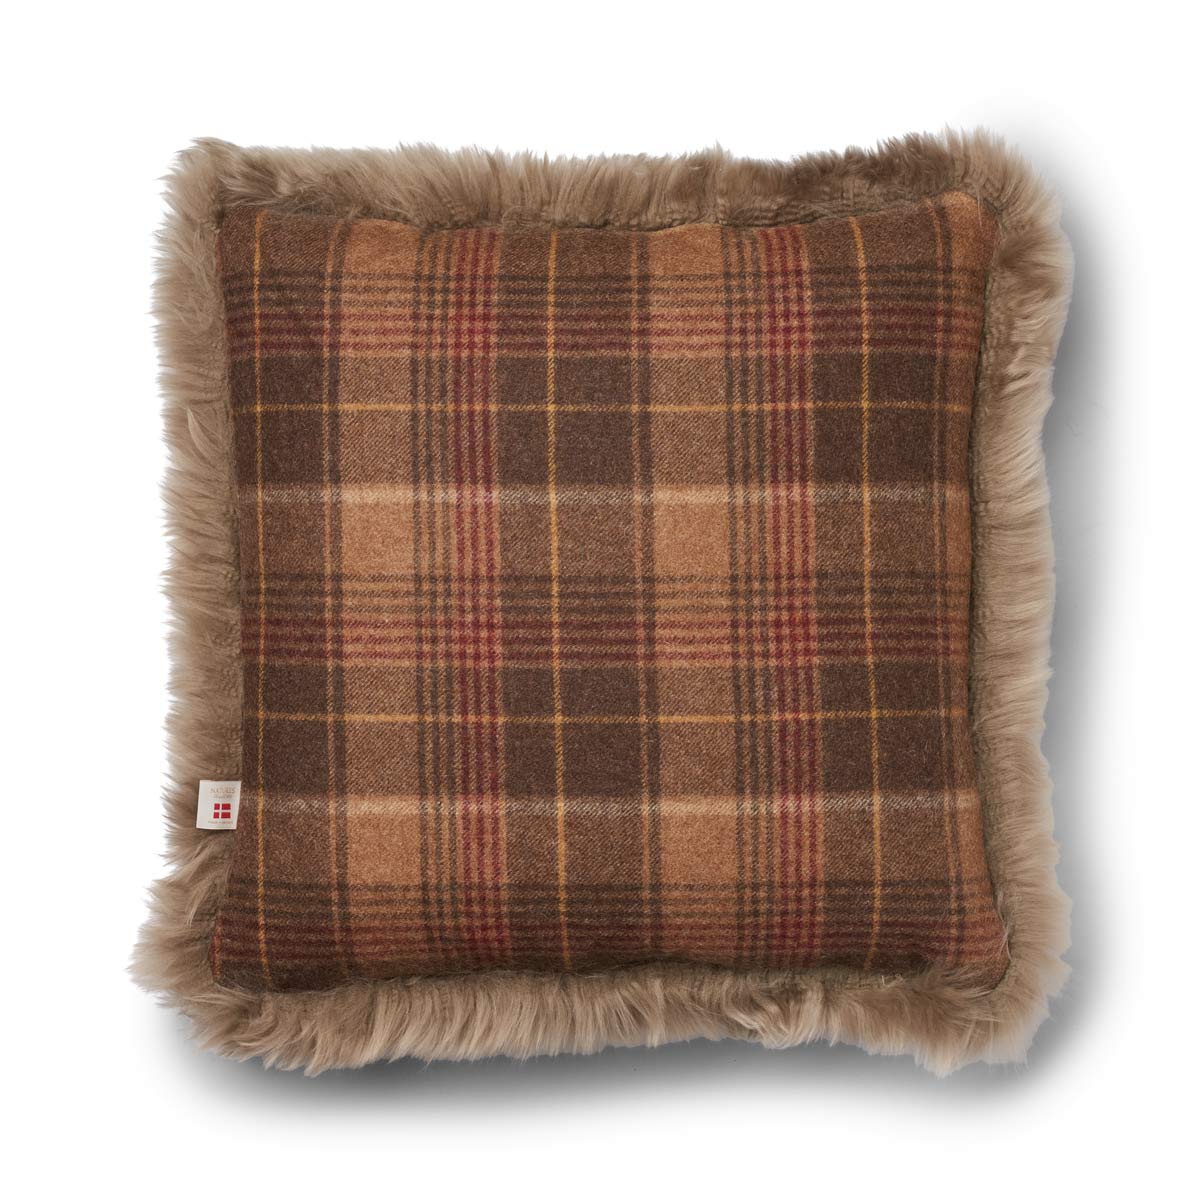 Checked Collection, Cushion One Side 100 % Wool, One Side LW New Zealand Sheepskin. Size: 52x52 cm.